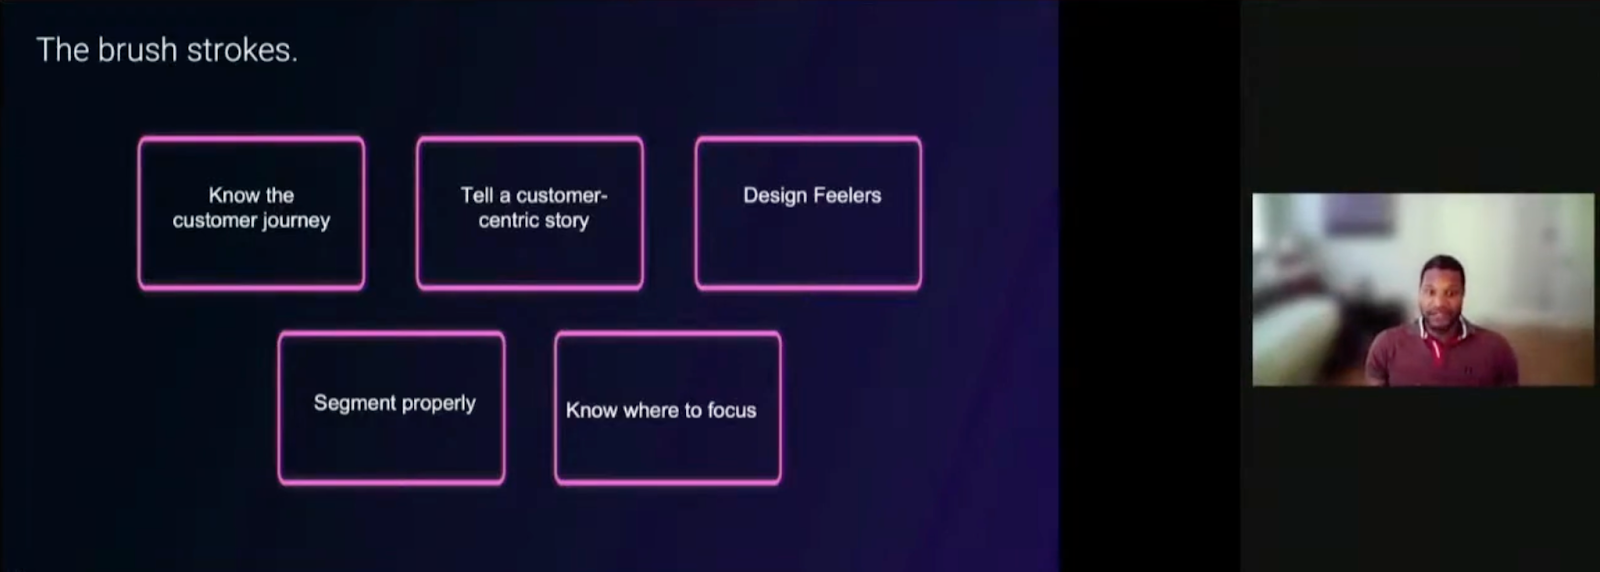 Another presentation slide titled "the brush strokes" and five boxes which say "know the customer journey", "tell a customer-centric story", "design feelers", "segment properly" and "know where to focus". 